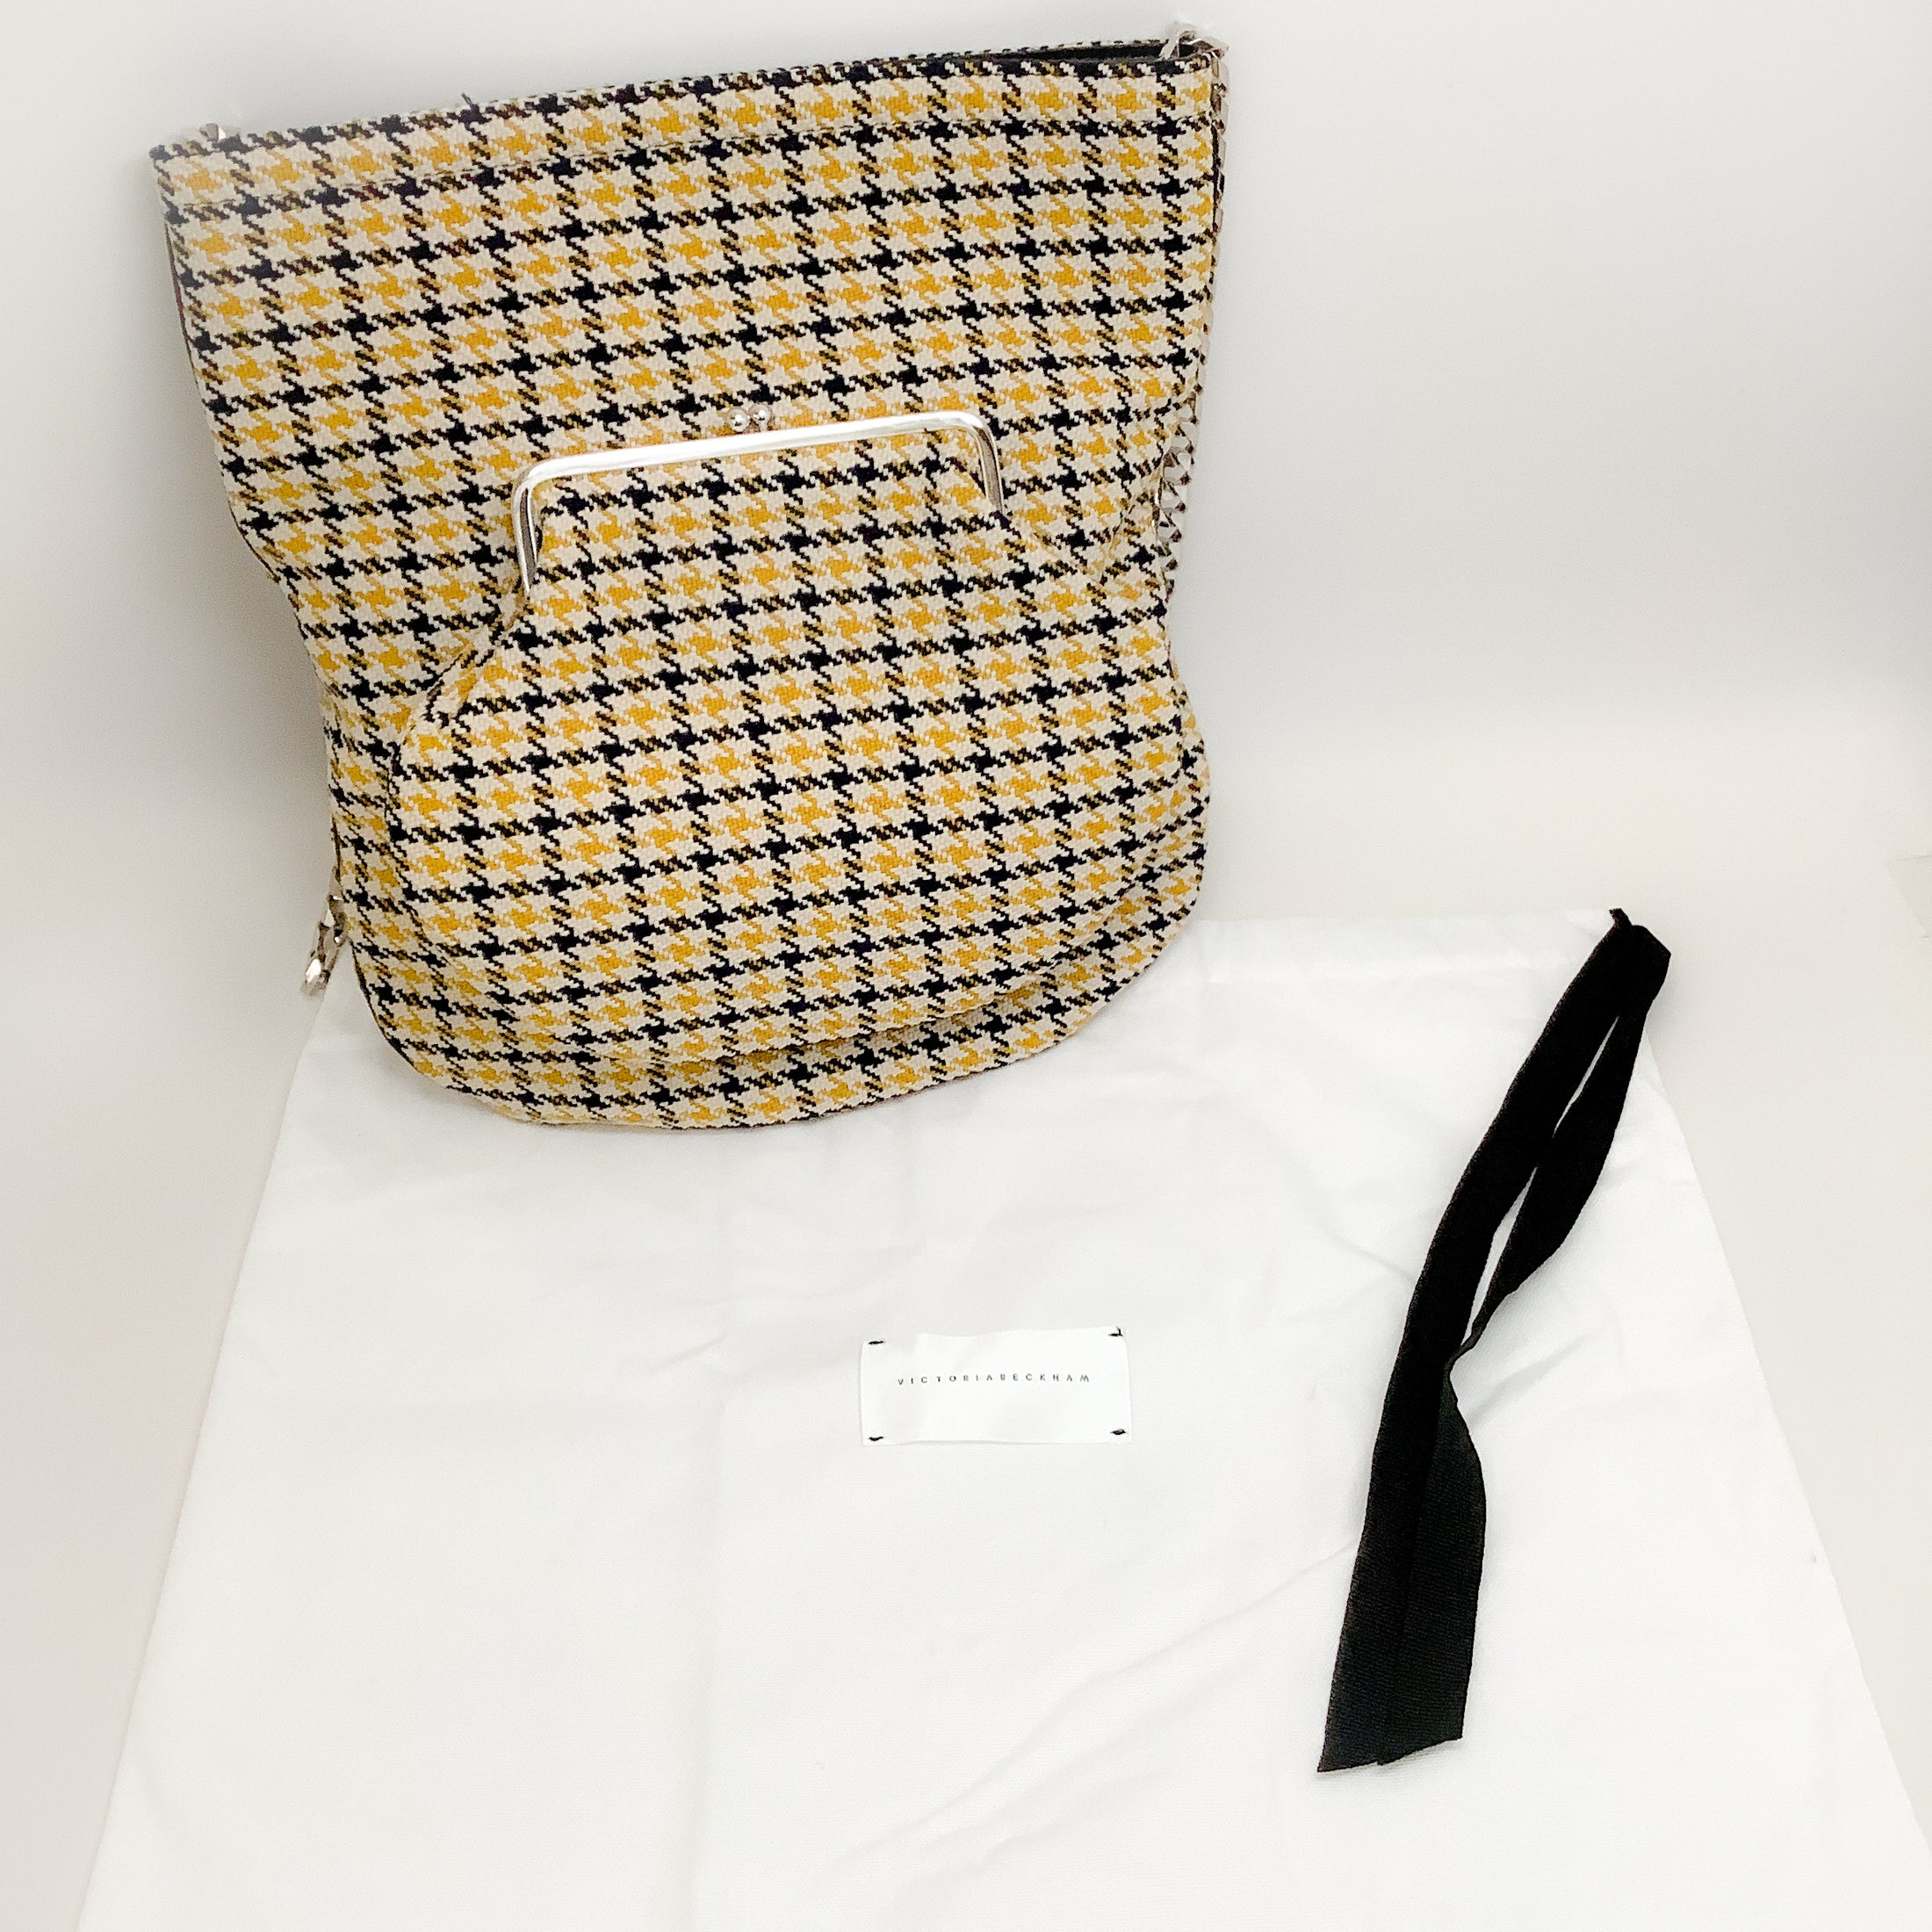 Victoria Beckham Black / Yellow Houndstooth Shoulder Bag With Chain Strap